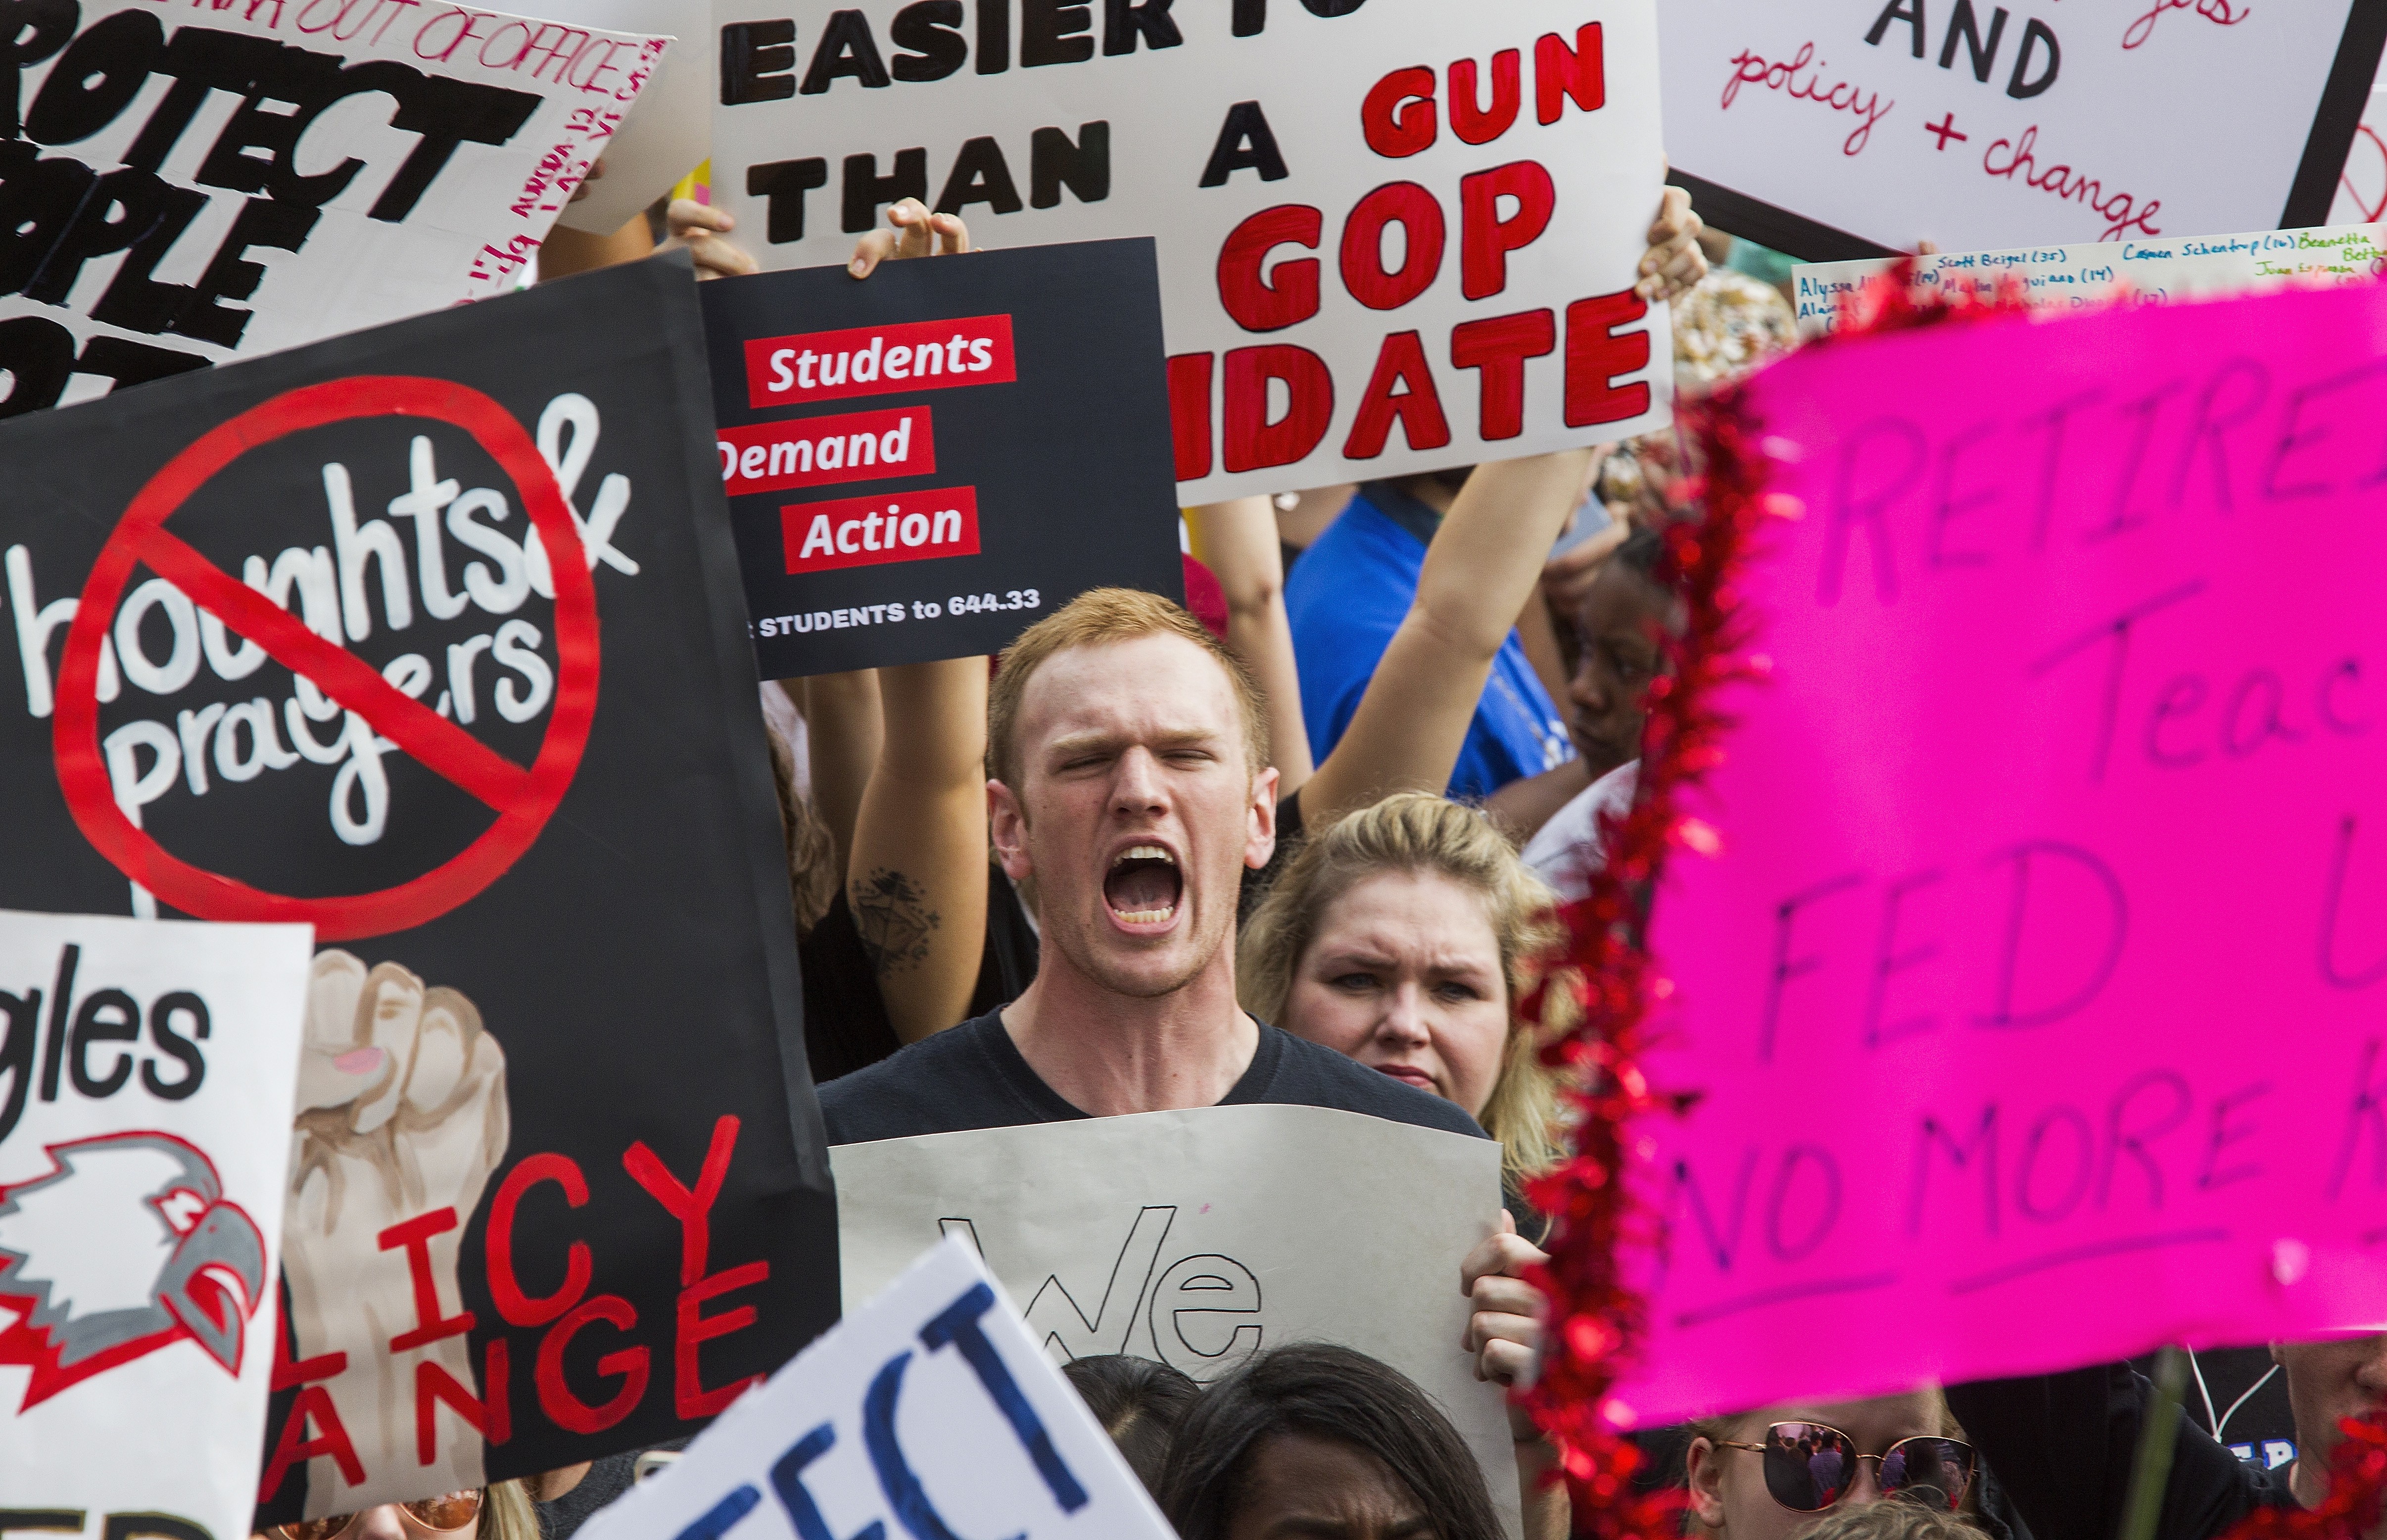 Protesters rally against gun violence in Tallahassee, Florida, on February 21. Students at schools across South Florida planned short walkouts on the one-week anniversary of the deadly shooting at Marjory Stoneman Douglas High School. Photo: AP